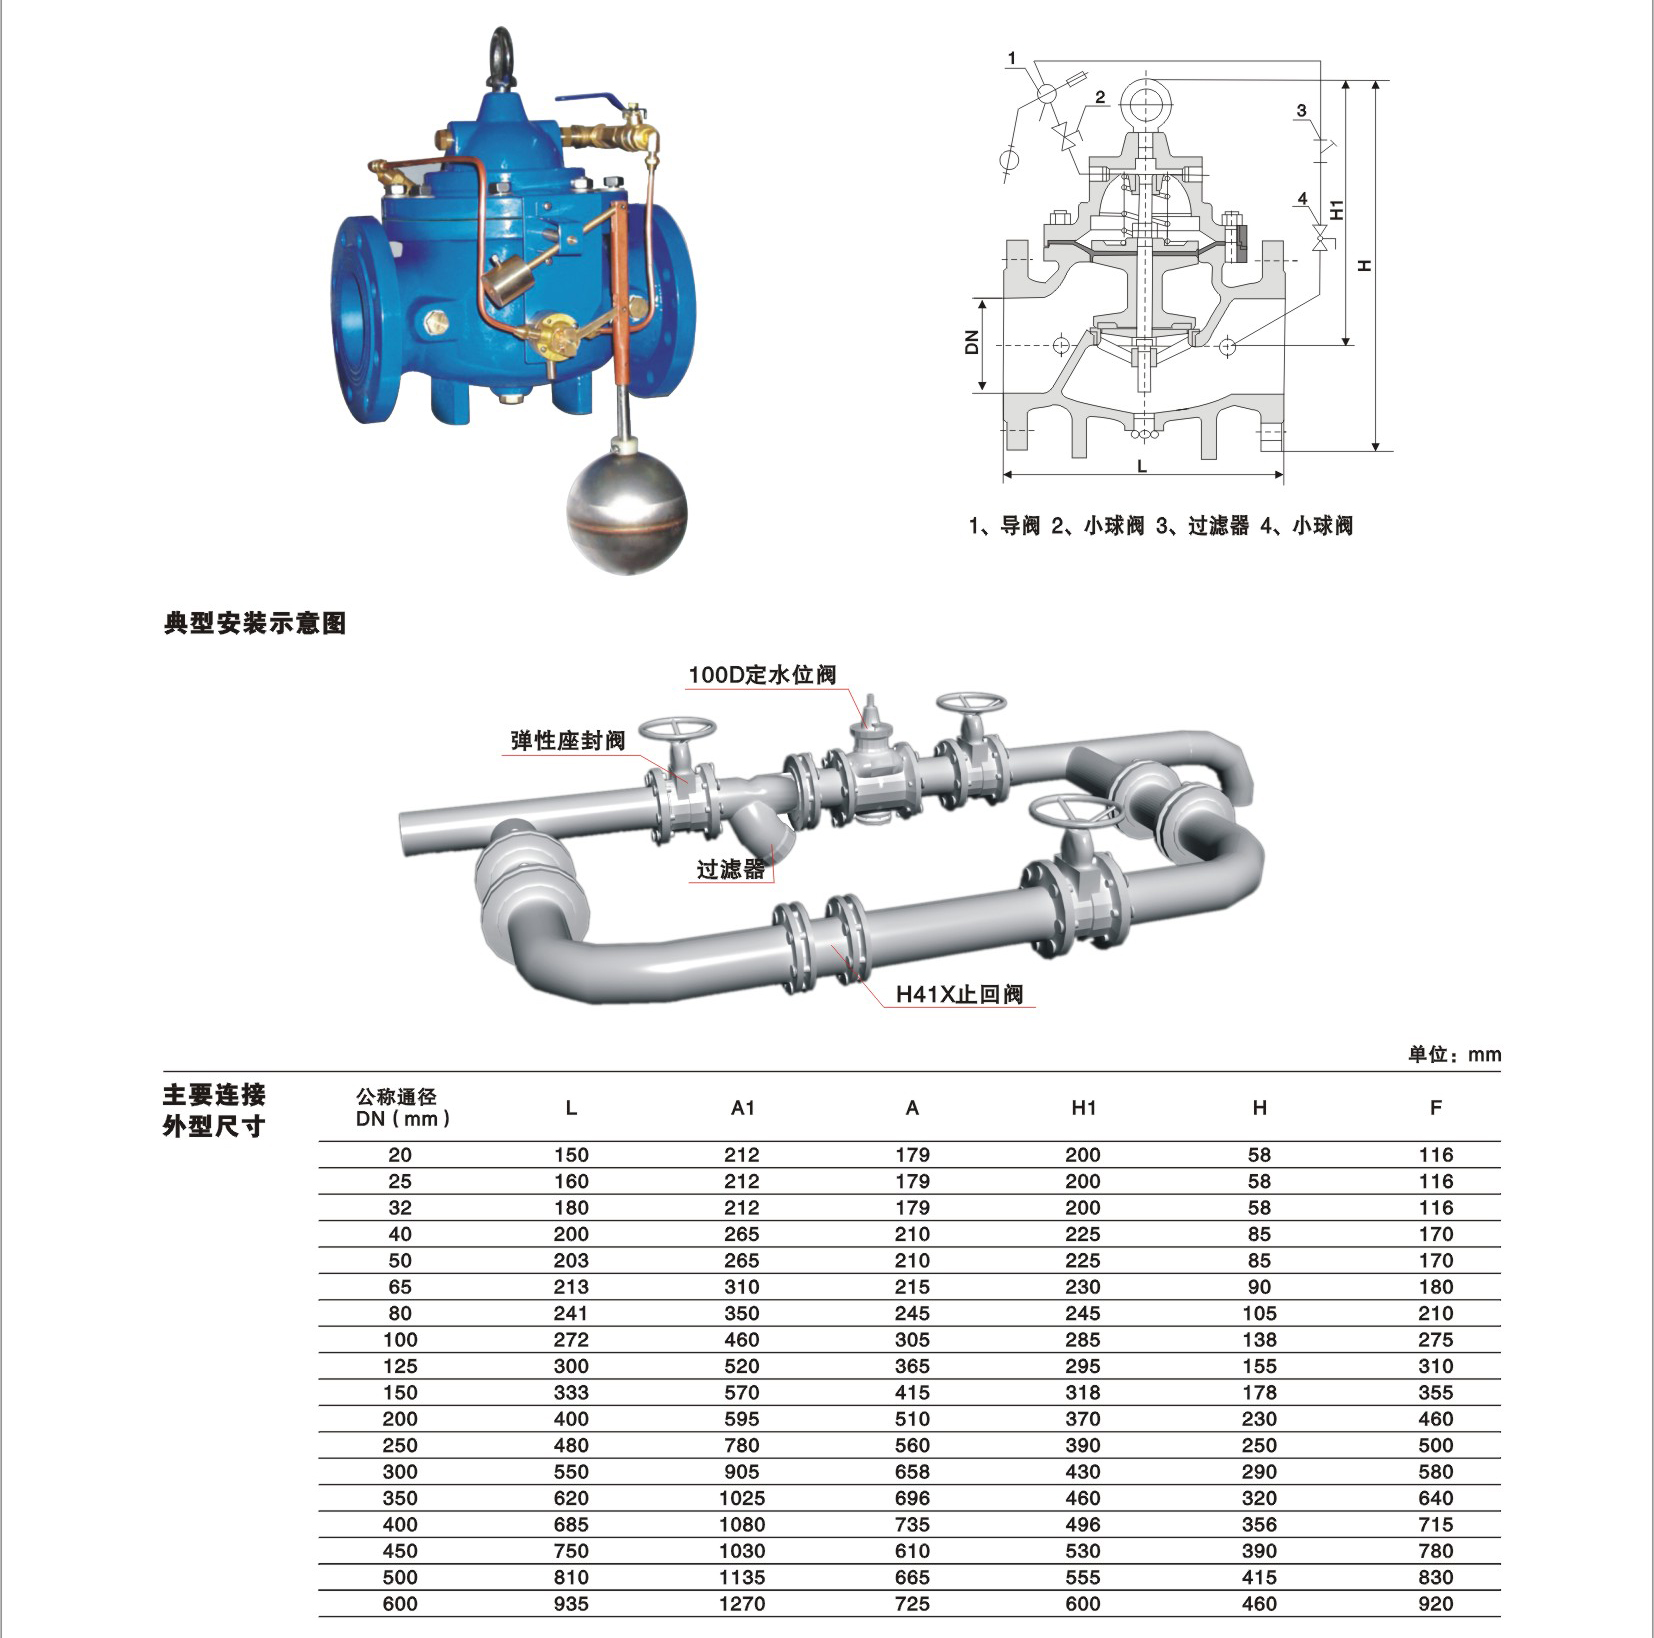 Hot sale China Cast Steel Wcb Ball Float Steam Valve (FT14)